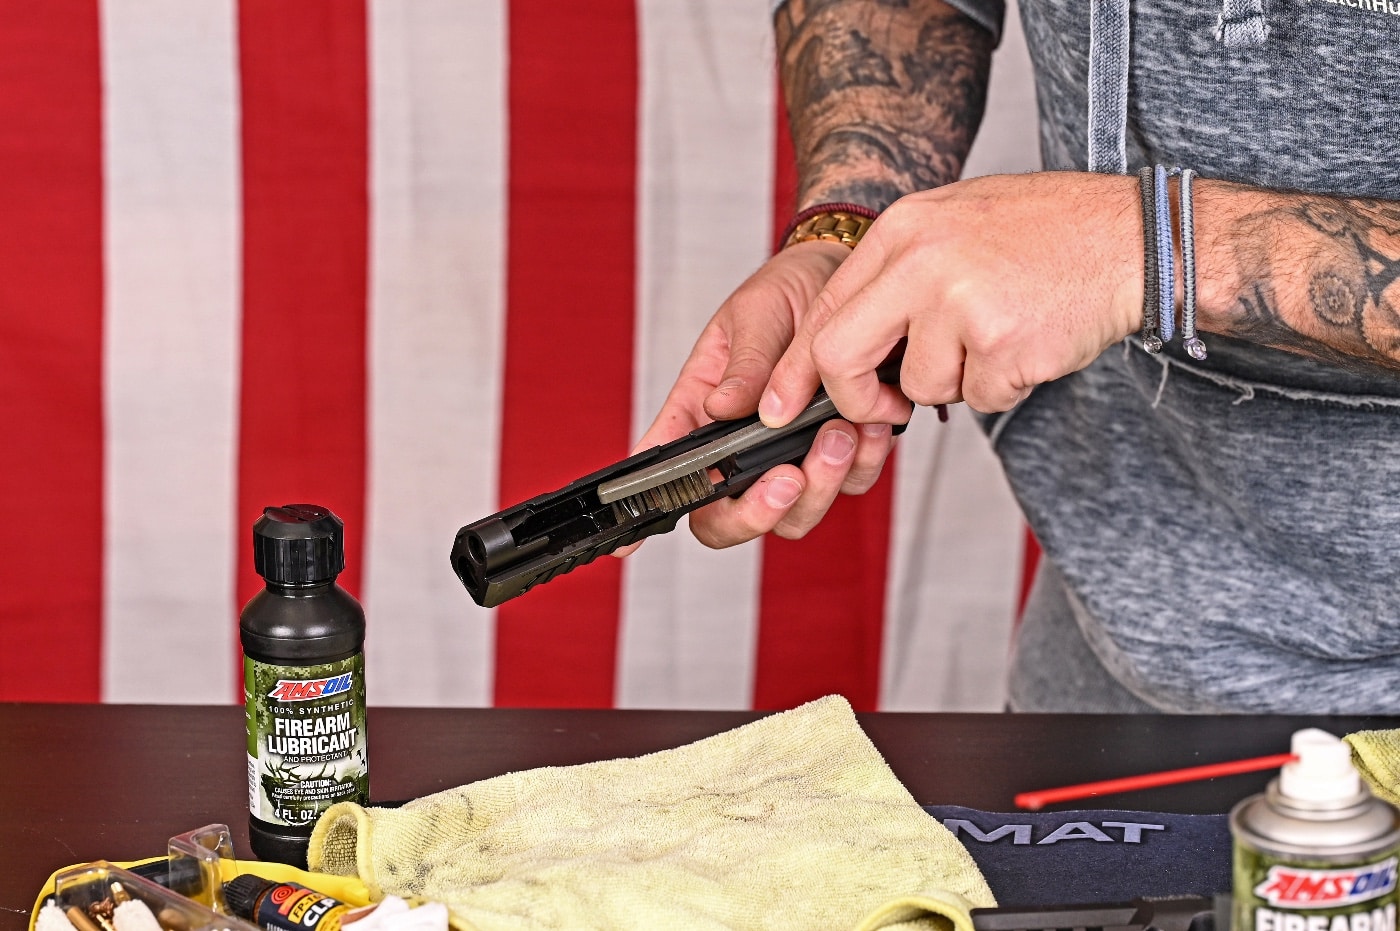 Here the author demonstrates how to clean the gun's slide in this photo. Even if your gun stays in a gun safe most of the time, dust and dirt can still find its way into the slide rails. You should want to clean the gun on some regular basis to ensure it's clean if you ever need it.